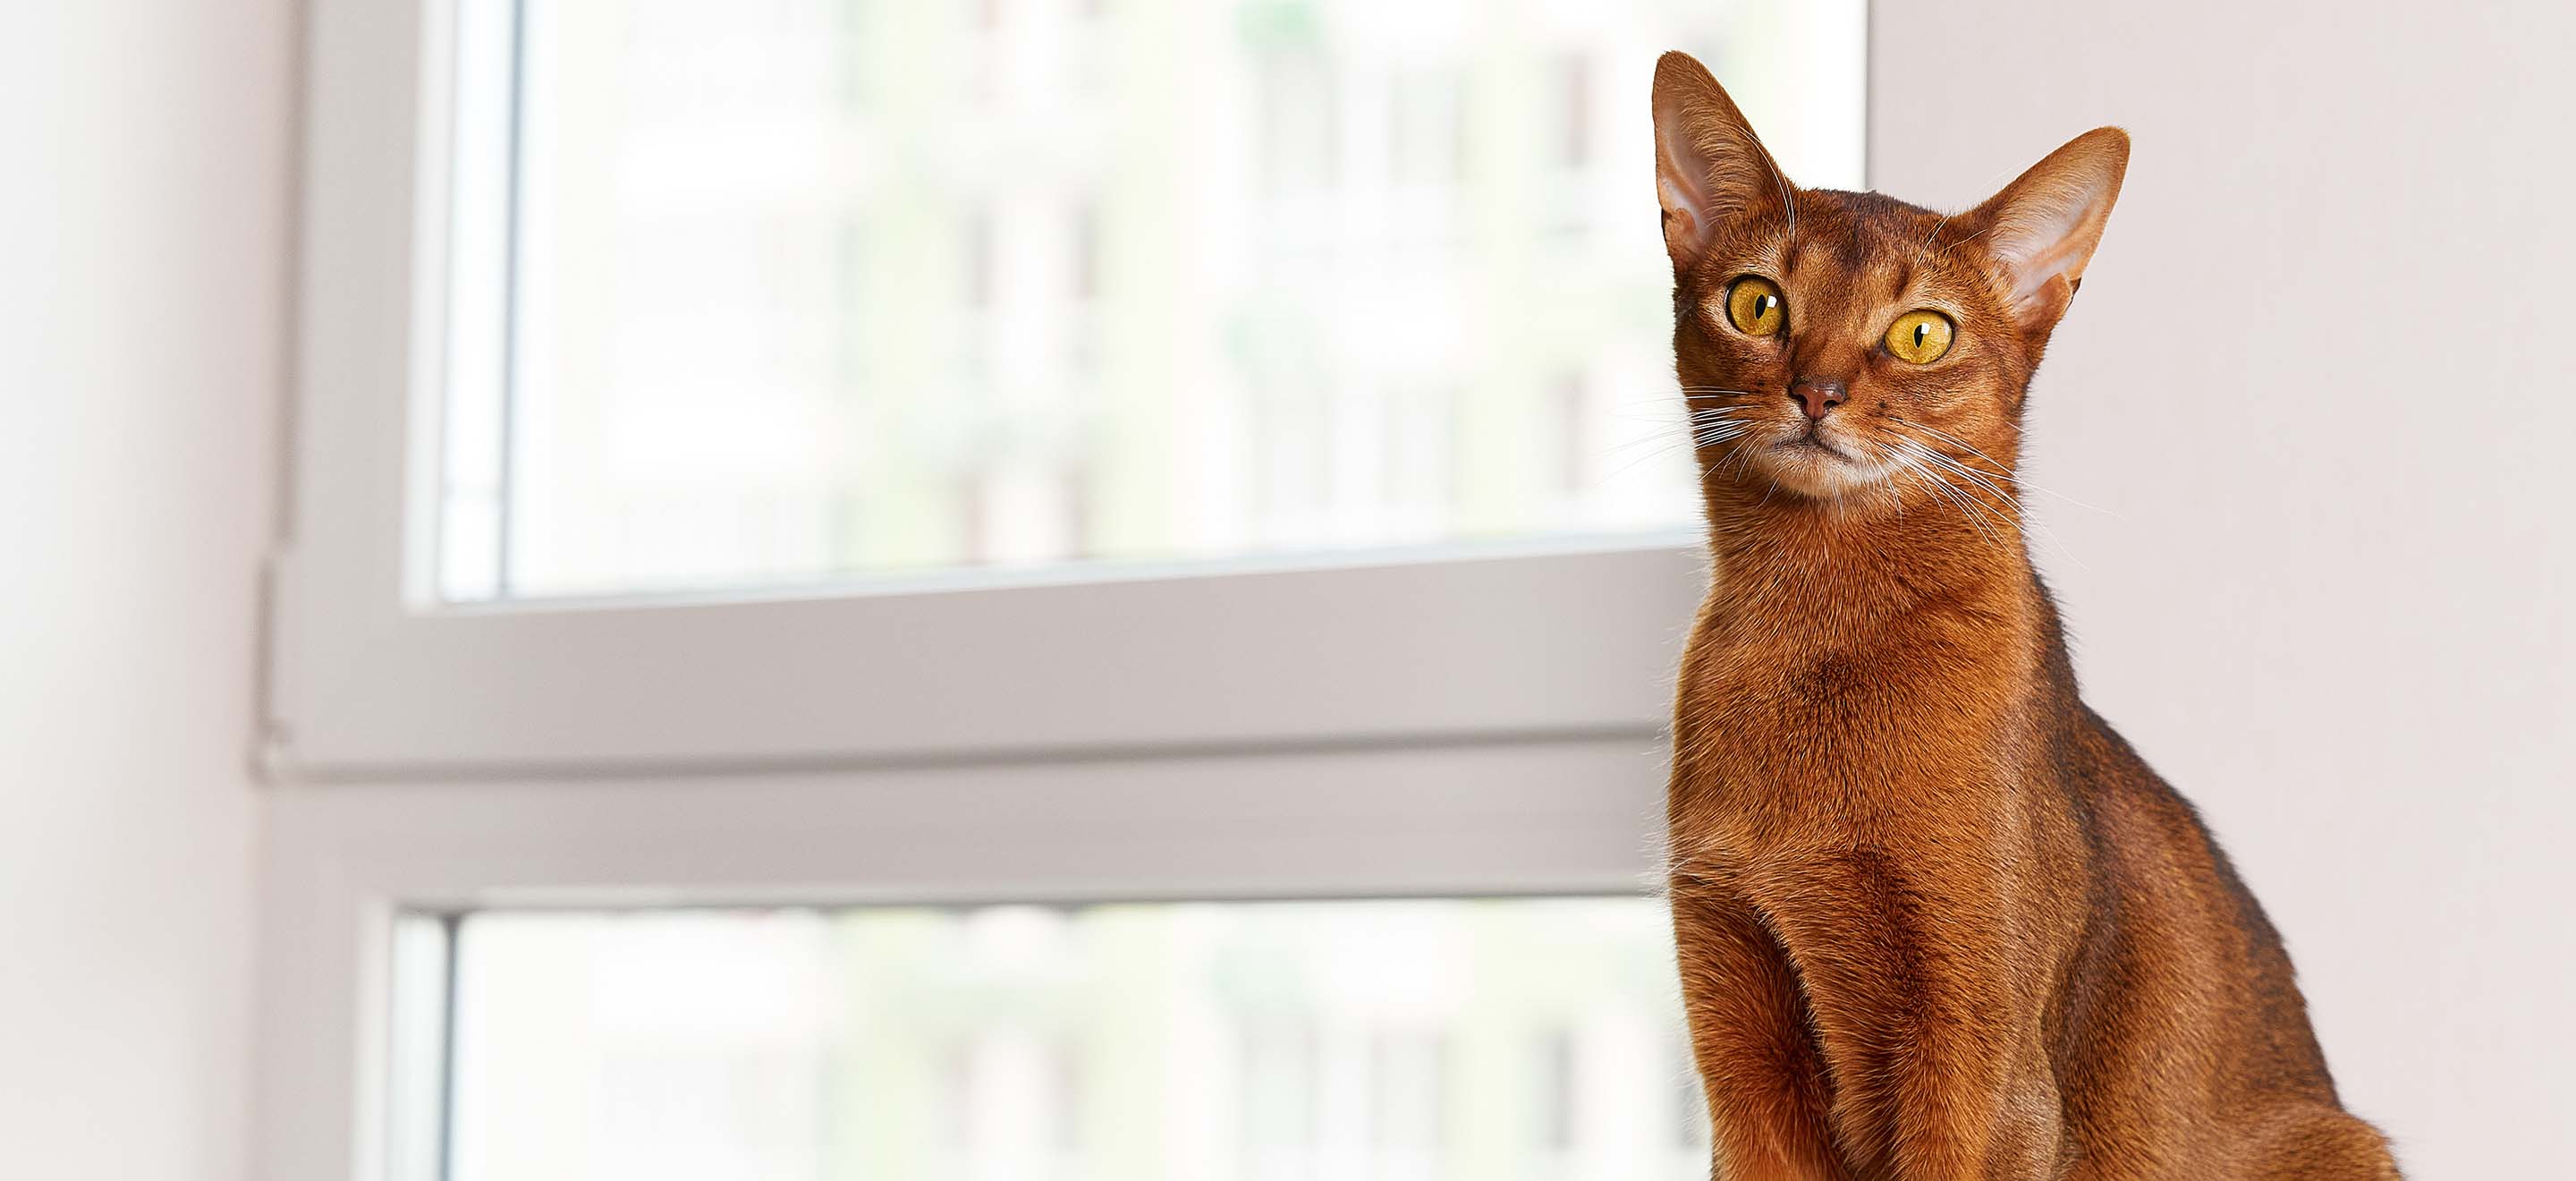 An orange Abyssinian cat standing on a cat tree by the window image